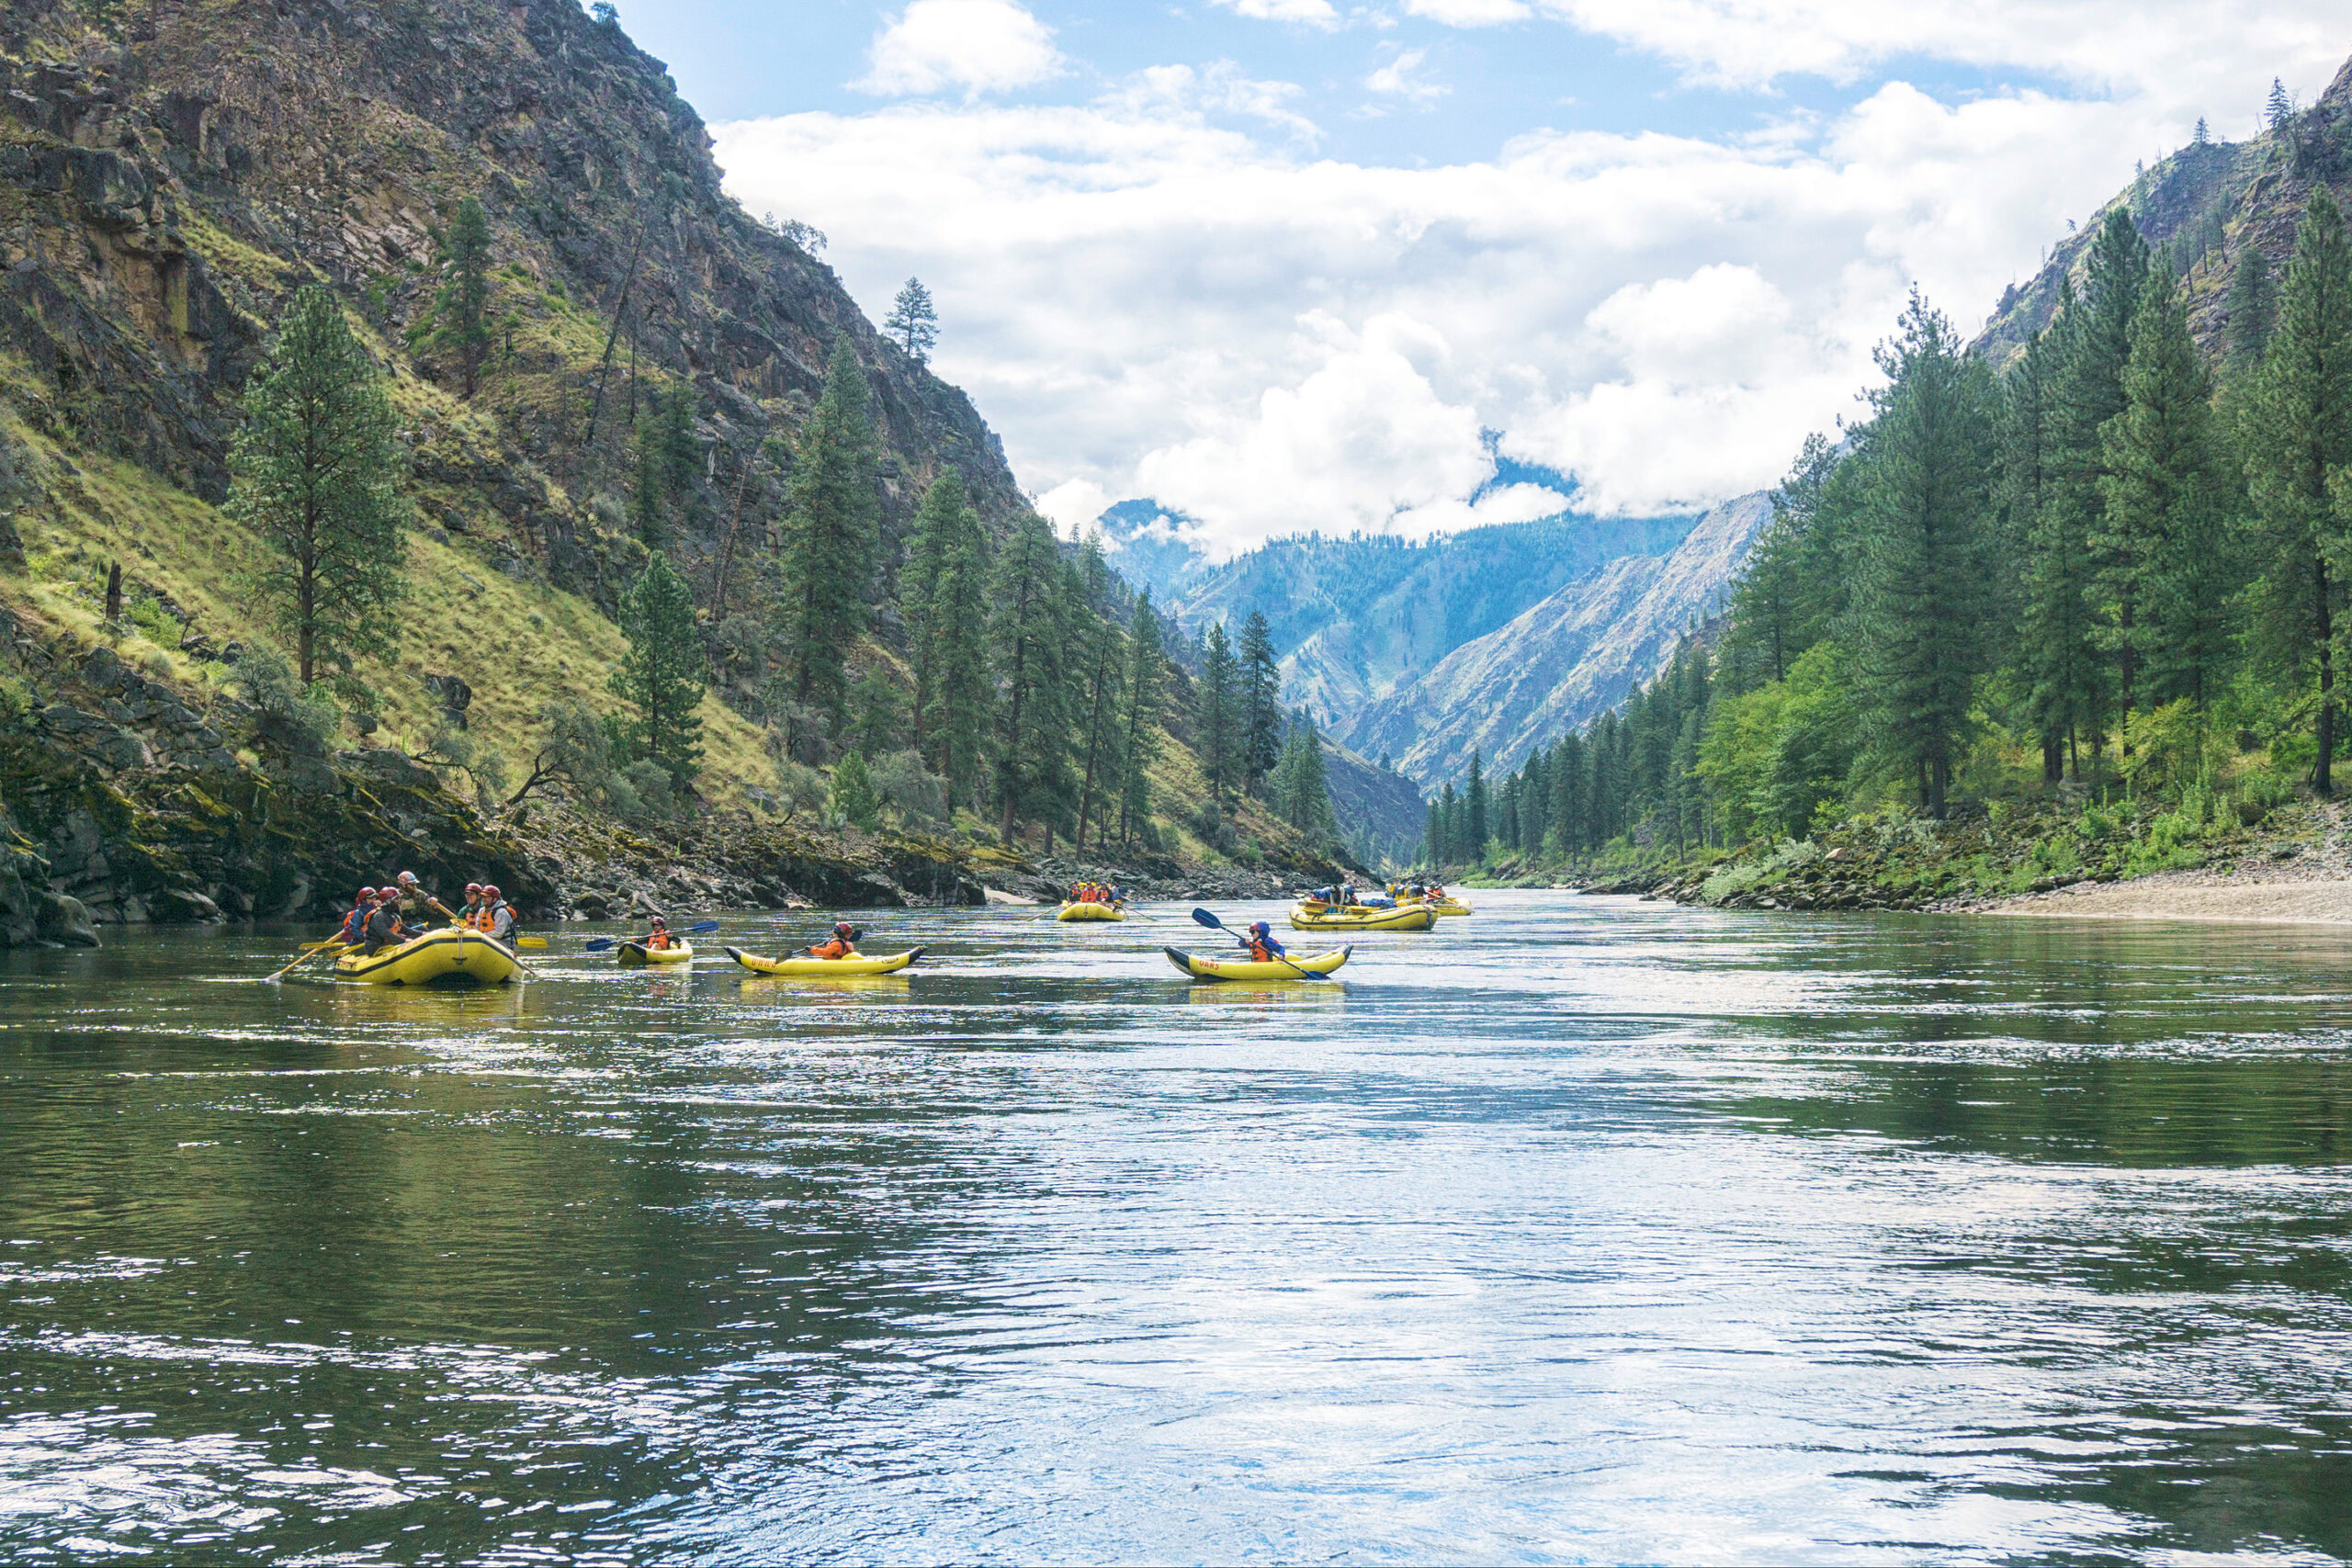 Several yellow rafts and inflatable kayaks make their way downstream on the Main Salmon River in Idaho.